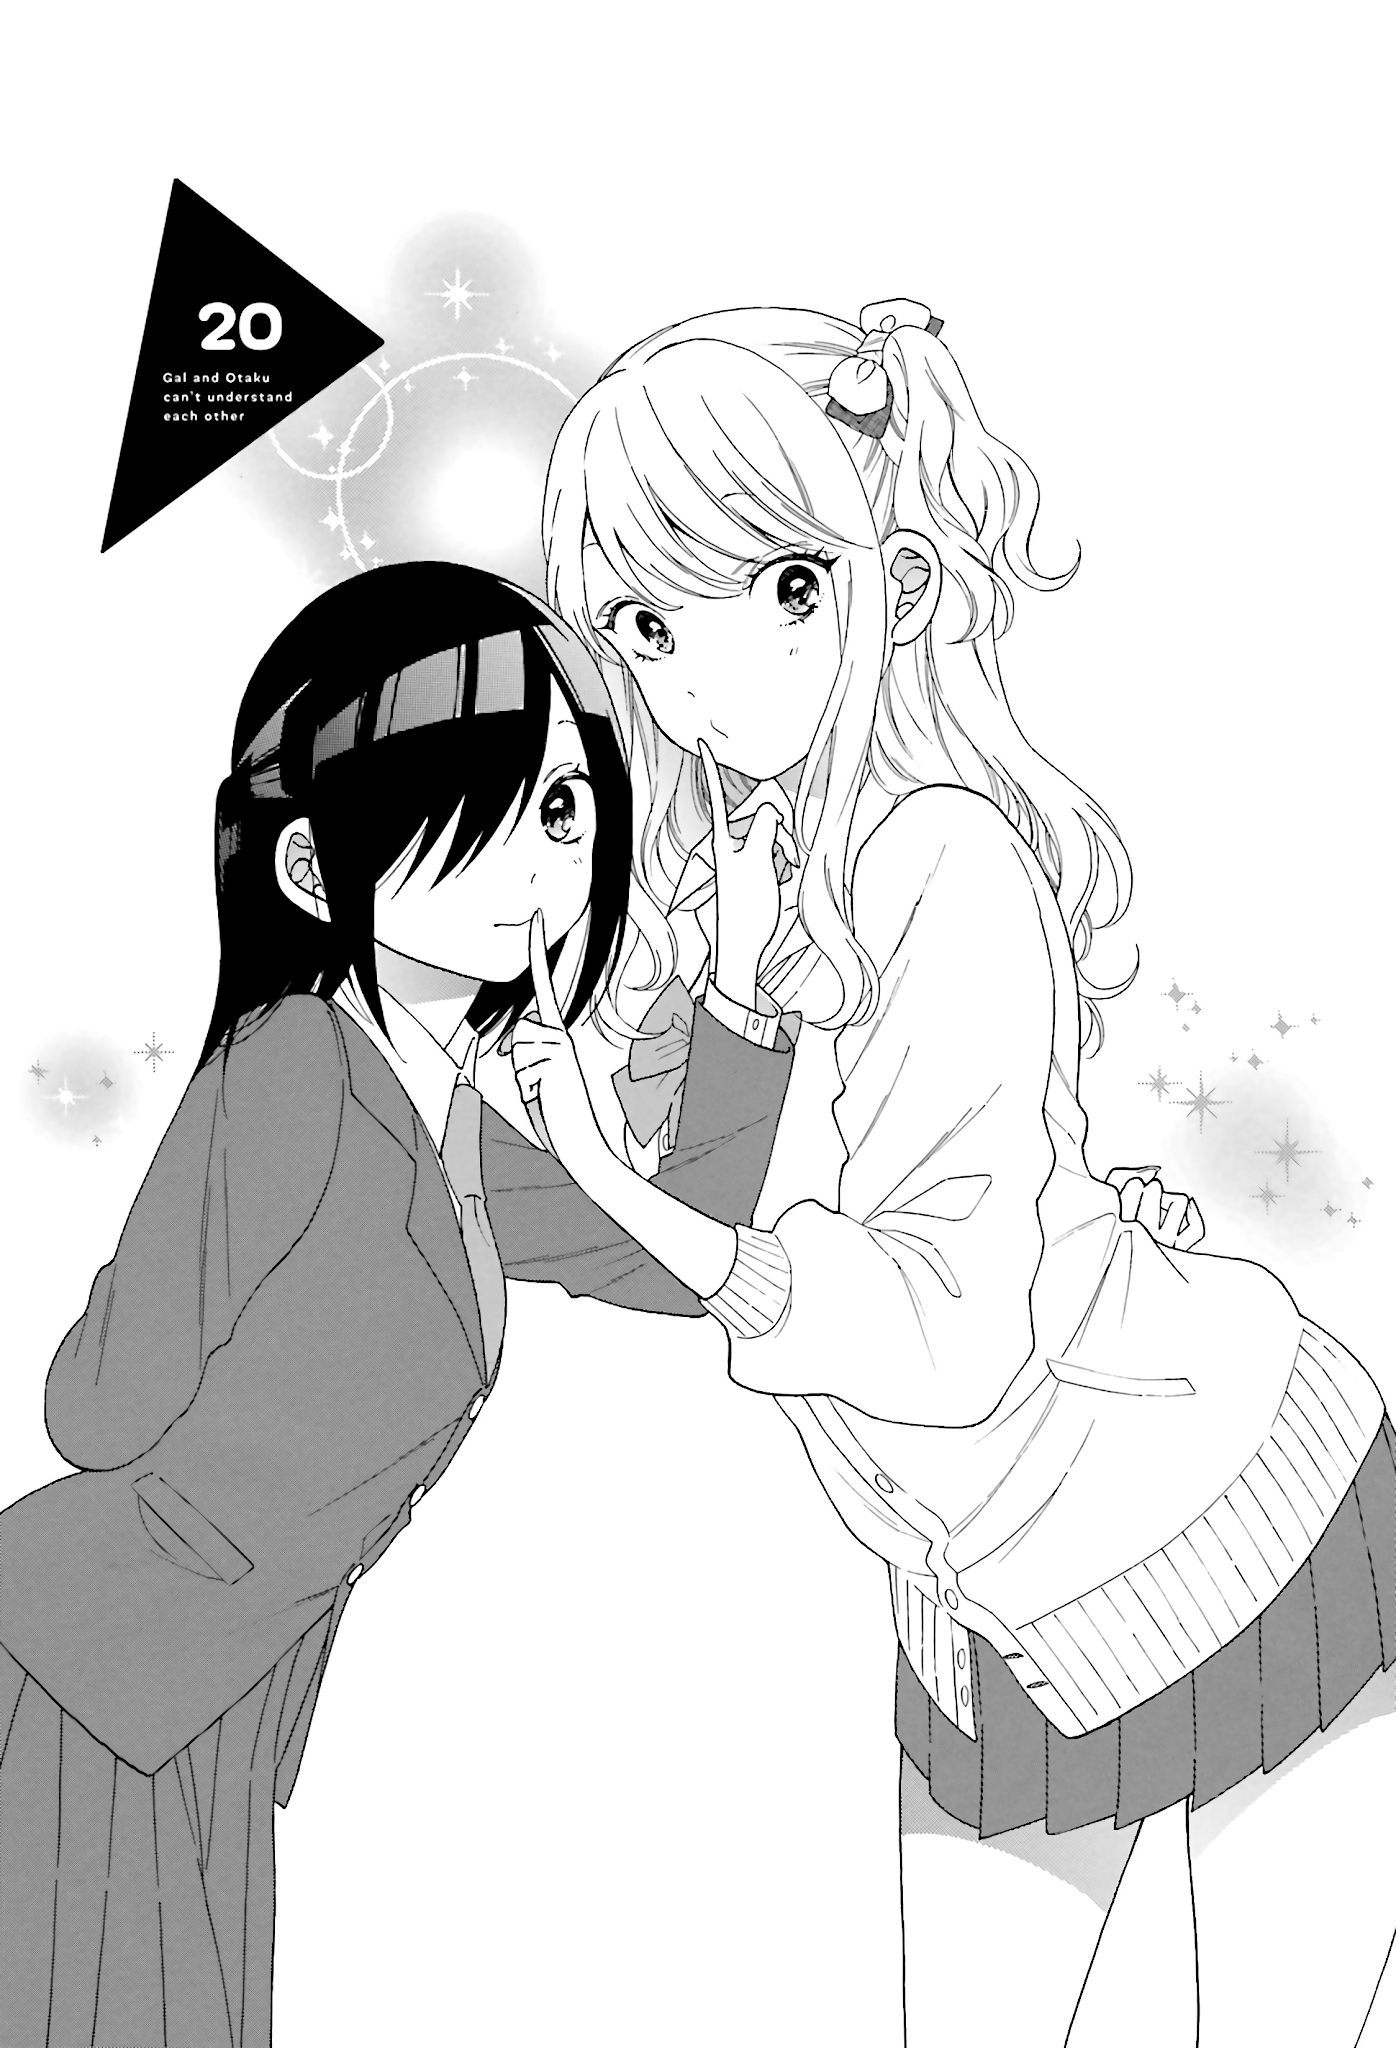 Gal and otaku can't understand each other - chapter 20 - #1